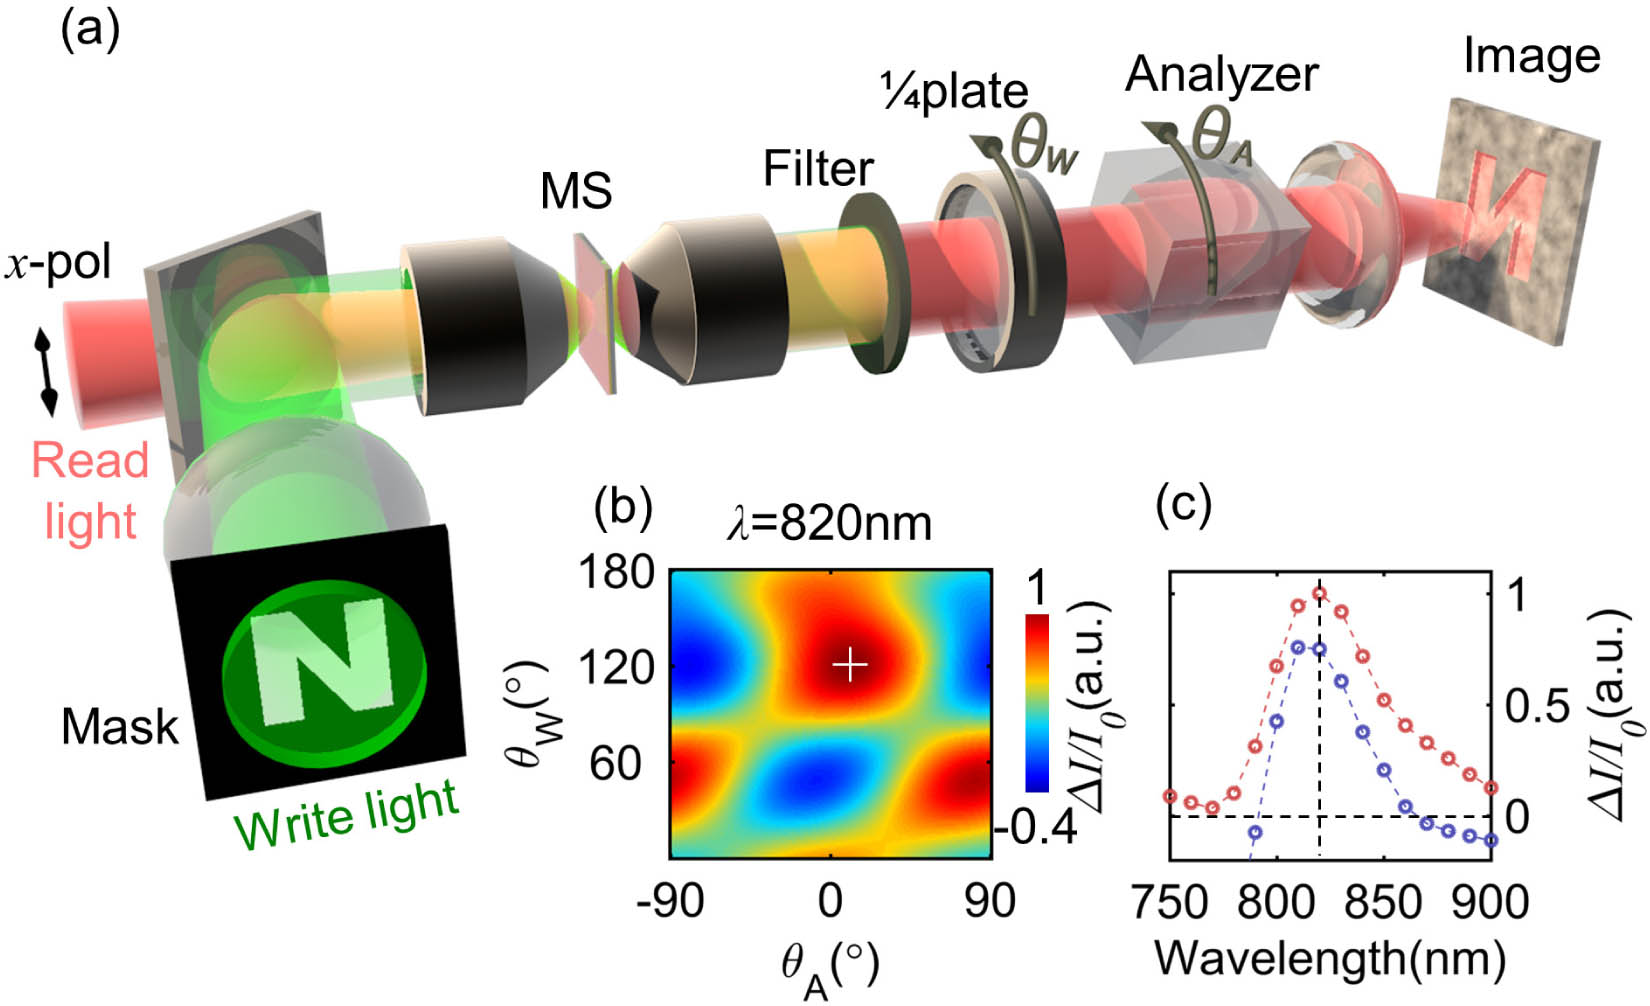 Image projection based on an MS-OASLM. (a) Schematic of the MS-OASLM image projection system. An input mask is imaged onto the MS plane using 532 nm green light and is duplicated in form of a spatially inhomogeneous polarization distribution in readout light. Such a polarization replica is transformed into an intensity replica by filtering through a combination of a waveplate and a polarizer. (b) Nonlinear intensity modulation ΔI transformed from polarization modulation. θW and θA are azimuth angles of the waveplate and analyzer, respectively. In the example shown, the wavelength of the read light is 820 nm. The maximum modulation is indicated by a white cross. ΔI is divided by the incident read light intensity (I0) to get rid of the influence of the power fluctuation of the read laser. (c) Nonlinear modulations to read light intensity at different wavelengths. Blue curve: only contribution from the nonlinear spectral shift in transmitted intensity is considered. For the wavelengths shorter than 790 nm or longer than 860 nm, ΔI is smaller than zero, which gives inverse images of the mask and was not used in our experiments. Red curve: both contributions of nonlinear changes in intensity and polarization are considered, which gives larger ΔI. The strongest modulation appears at 820 nm, to which the results are normalized. Empty circles are experimental data, and dash lines are eye guides.